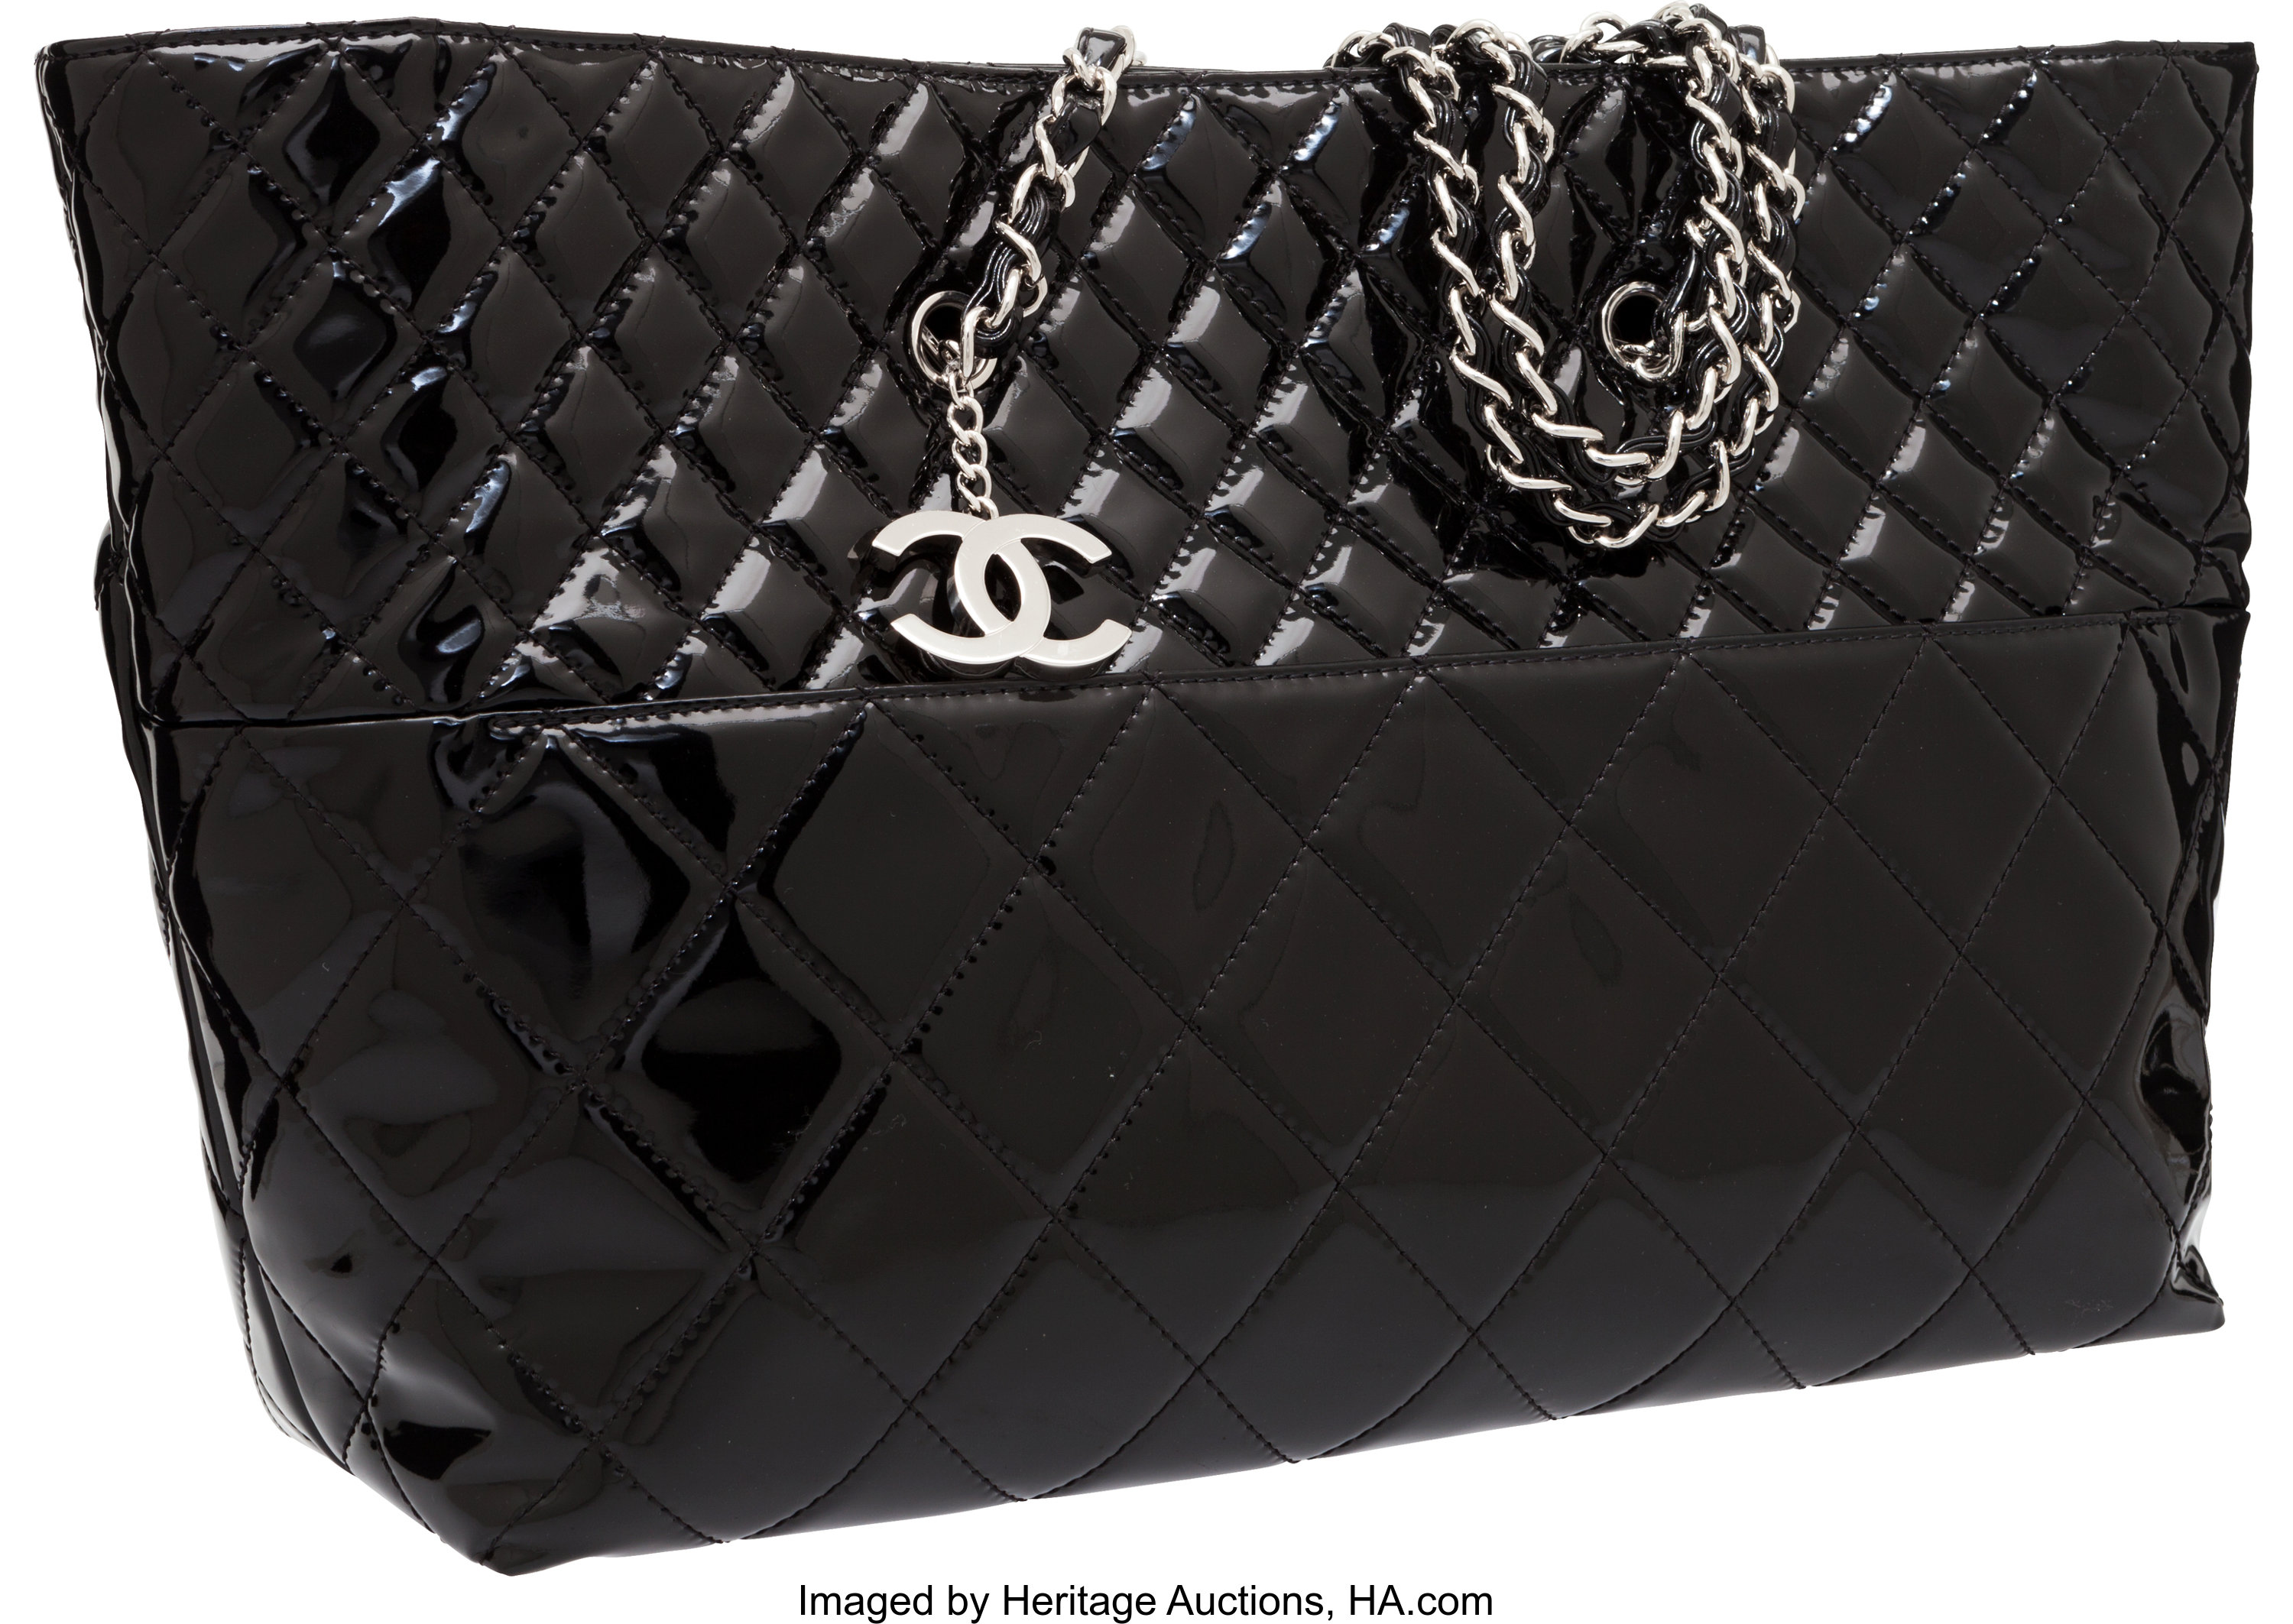 Chanel Black Quilted Patent Leather Tote Bag with Hardware. | #56286 | Heritage Auctions